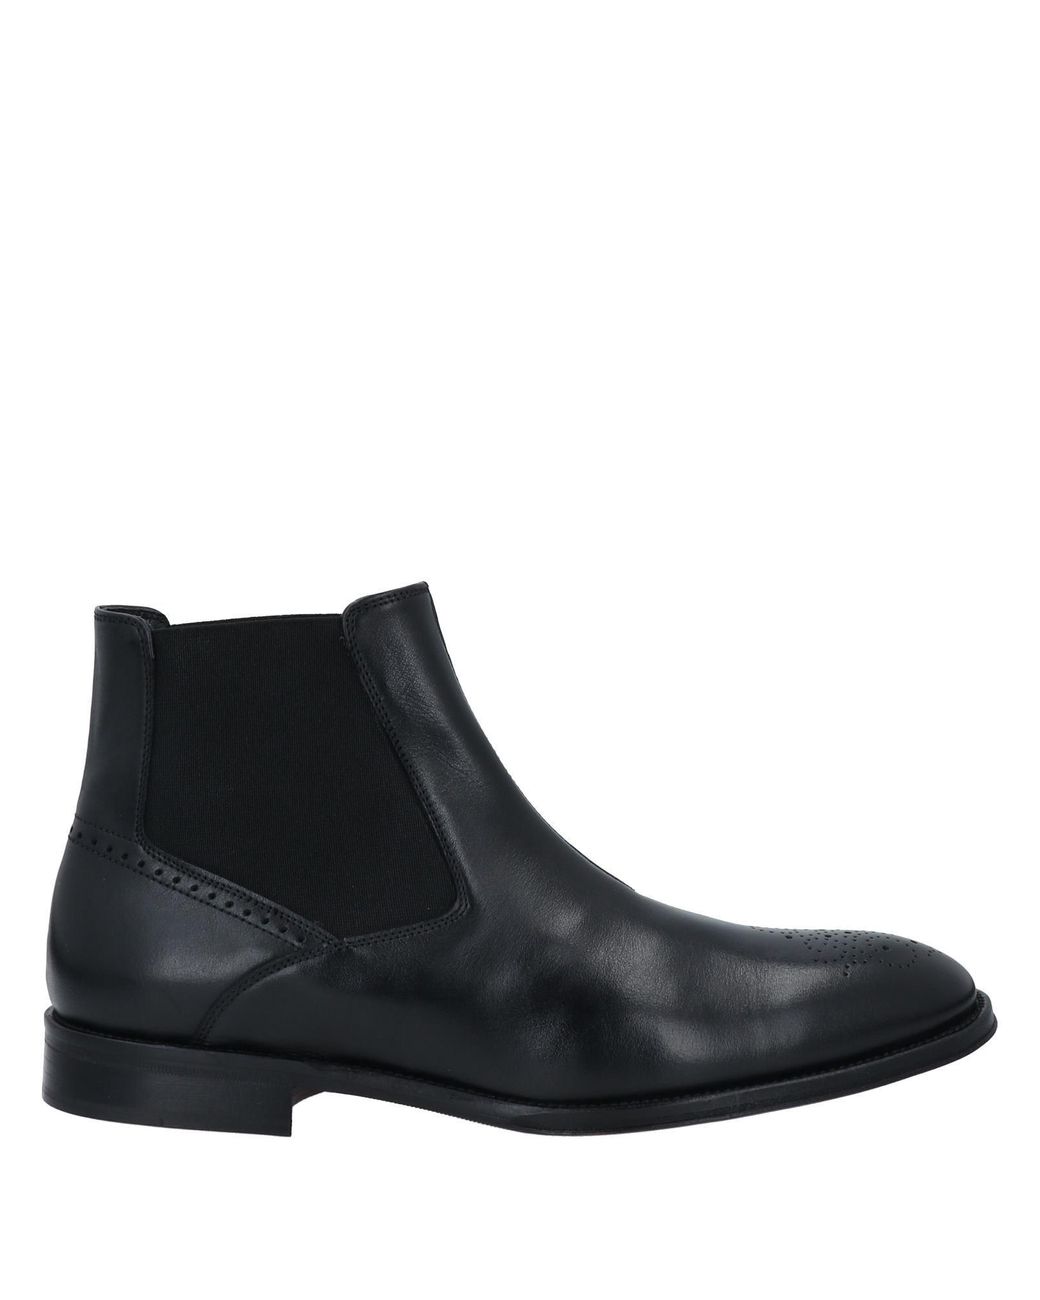 Bruno Magli Leather Ankle Boots in Black for Men - Lyst